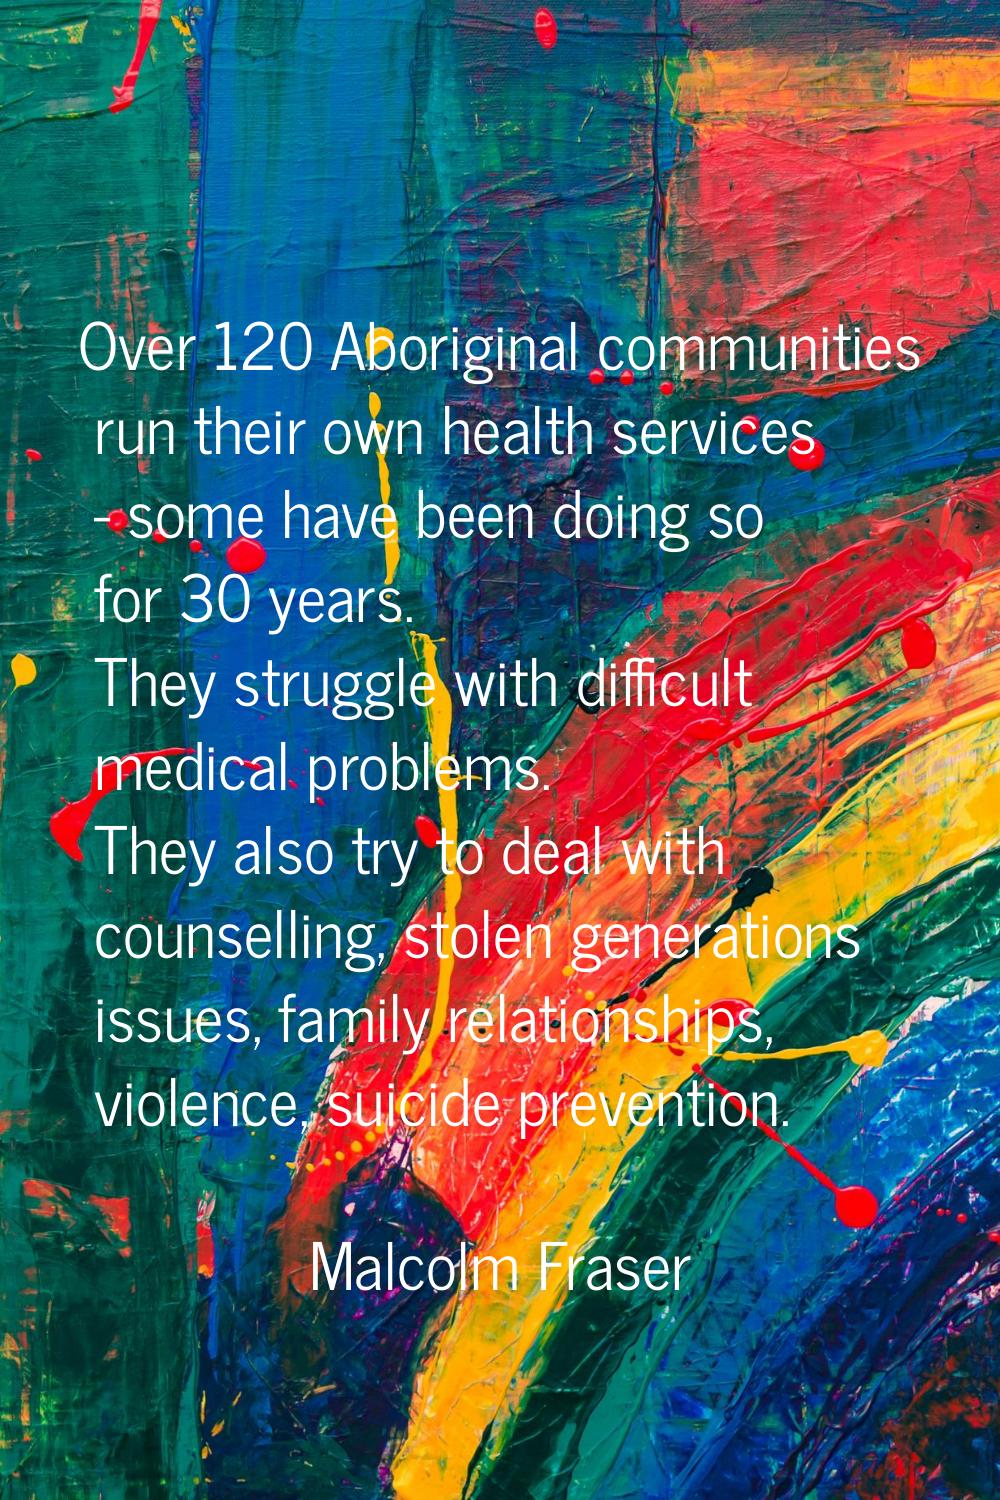 Over 120 Aboriginal communities run their own health services - some have been doing so for 30 year